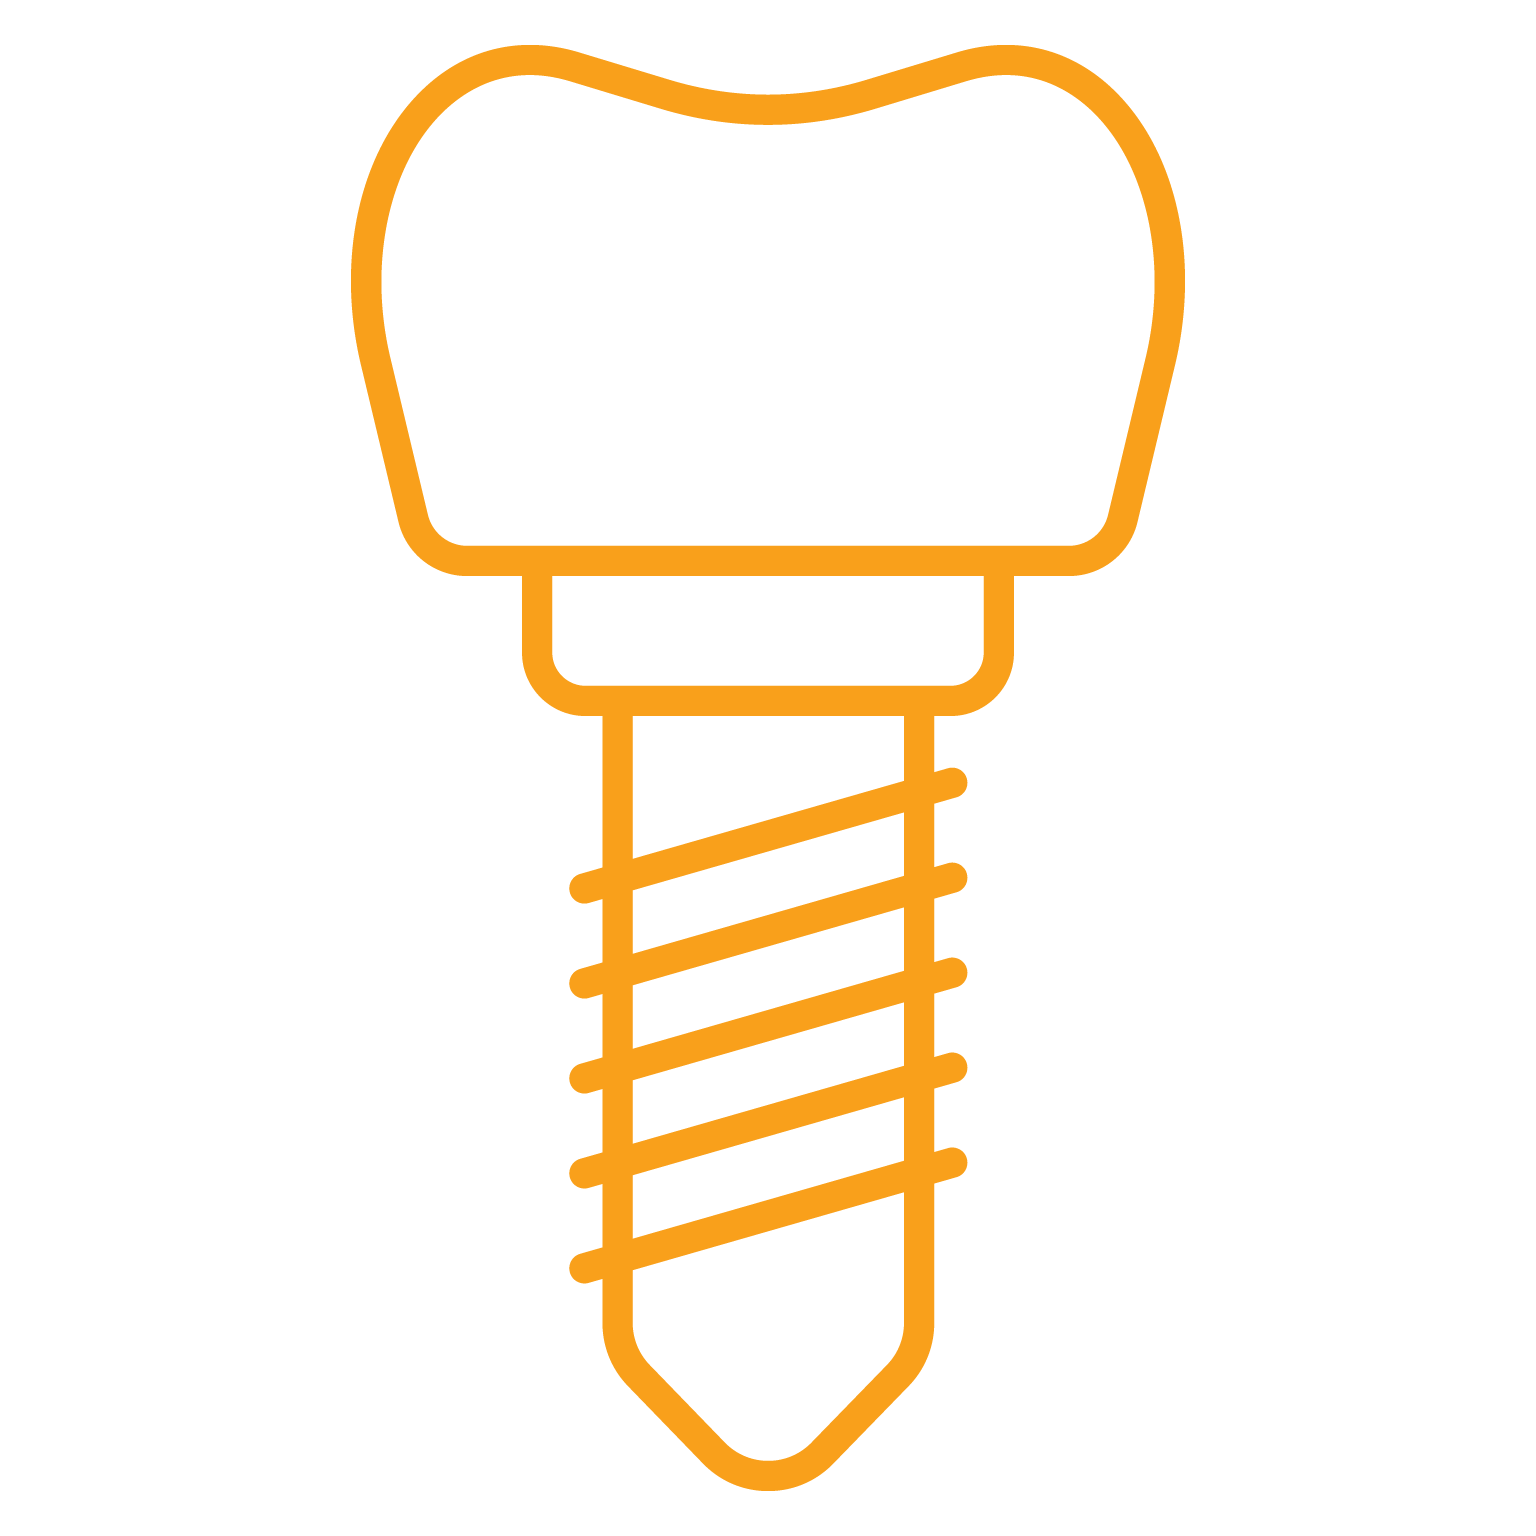 Gold-colored icon of dental implants, illustrating premium dental restoration solutions provided by Dr. Kevin Burgdorf.